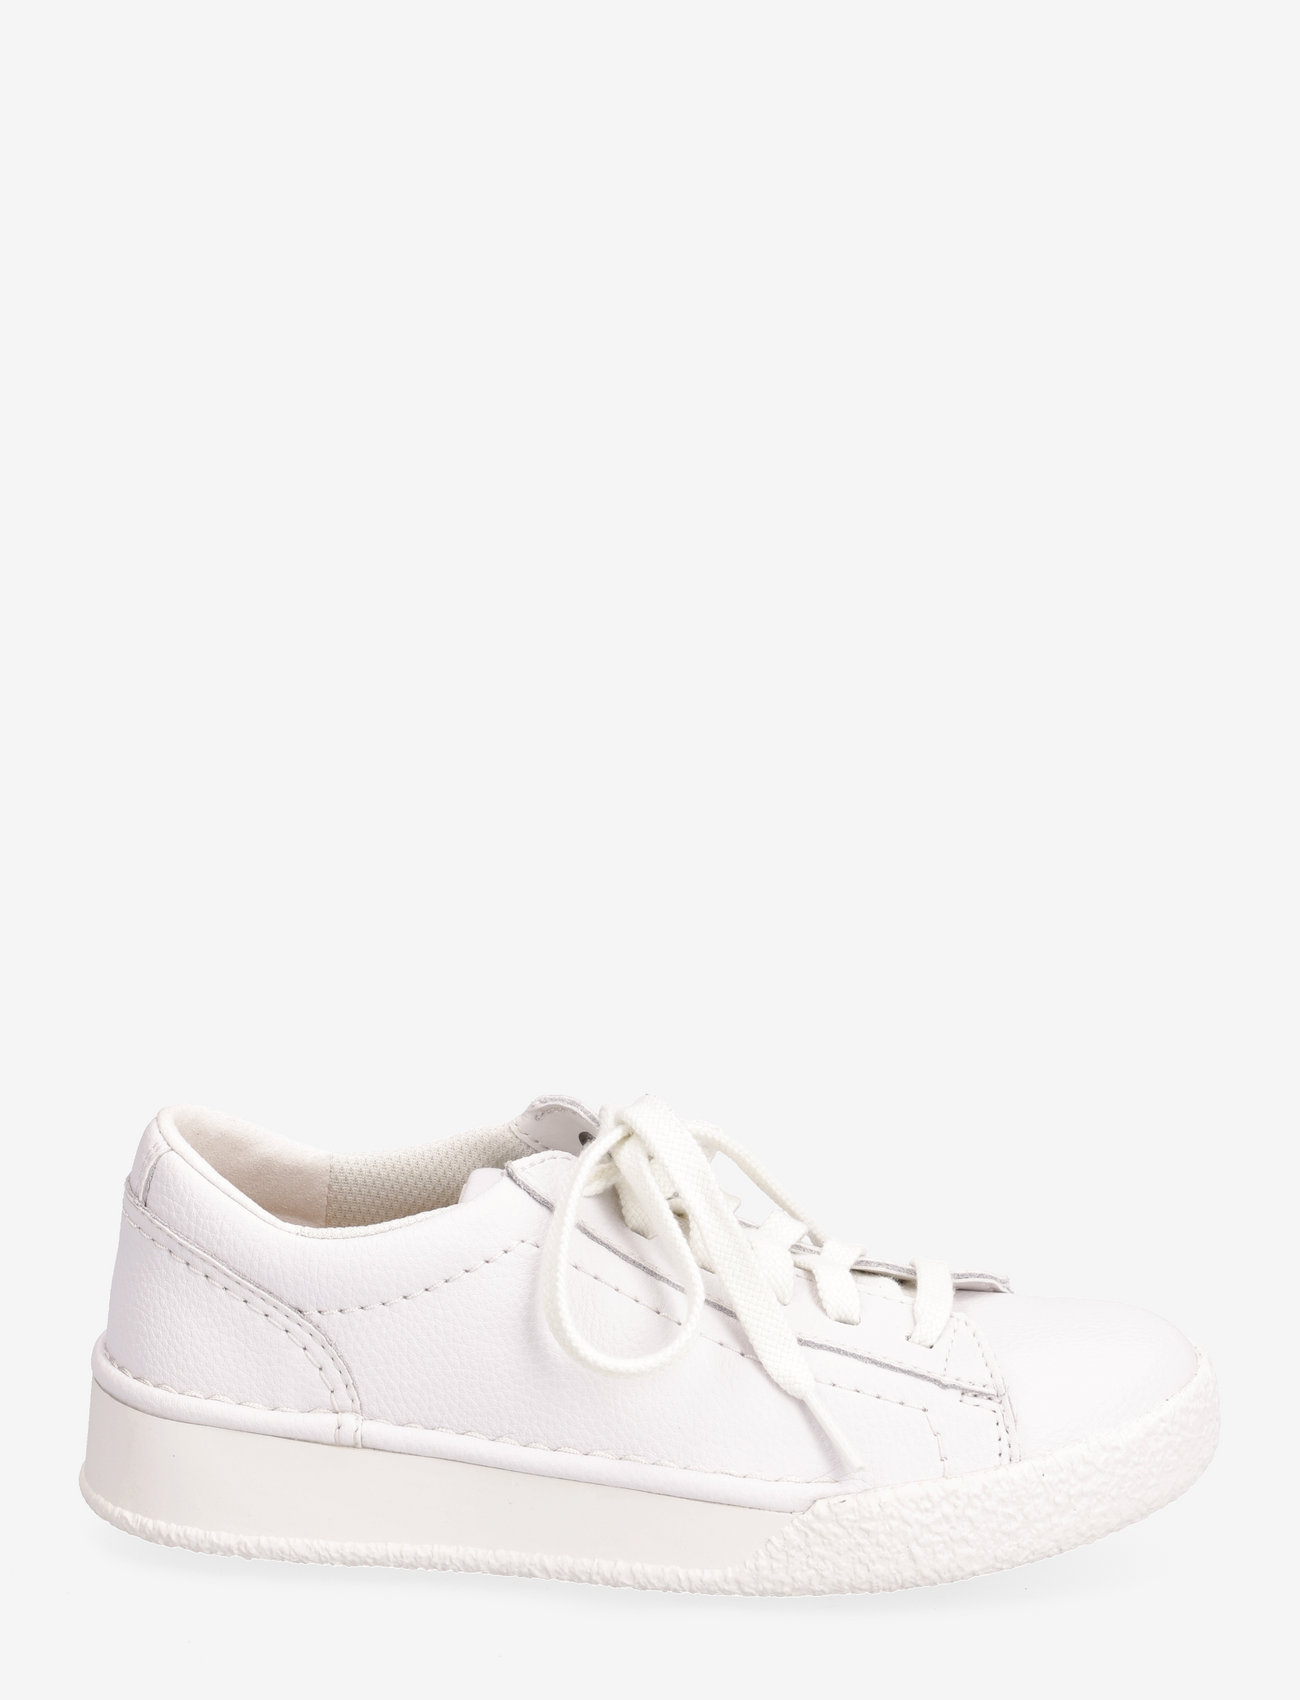 Clarks - CraftCup Walk - white leather - 1